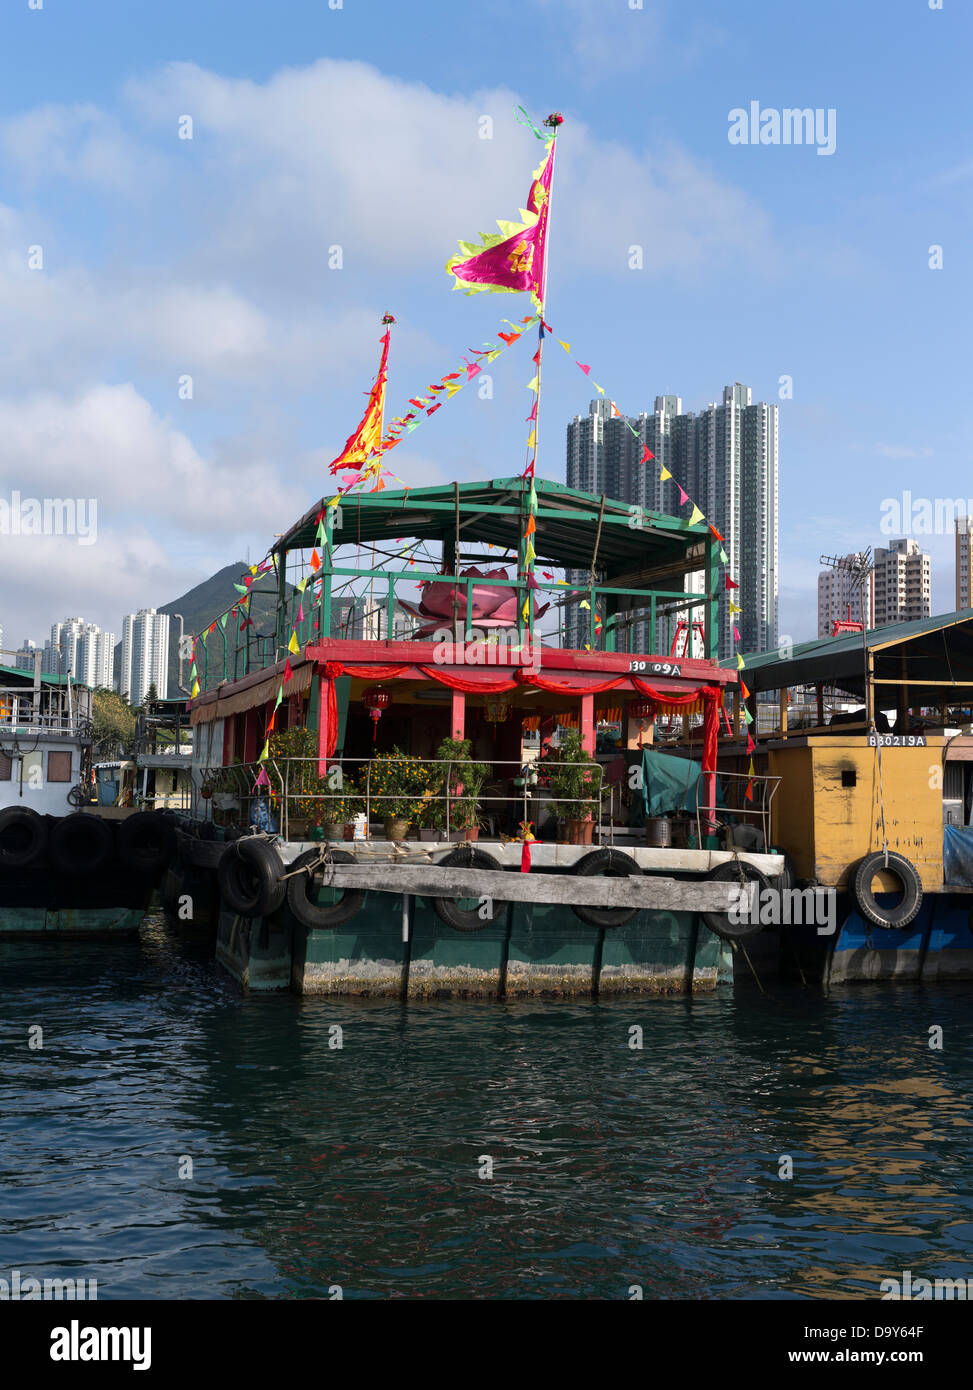 dh Chinese New Year ABERDEEN HONG KONG Family harbour junk boat with decorations flags house junks houseboat village floating harbor fishing vessel Stock Photo